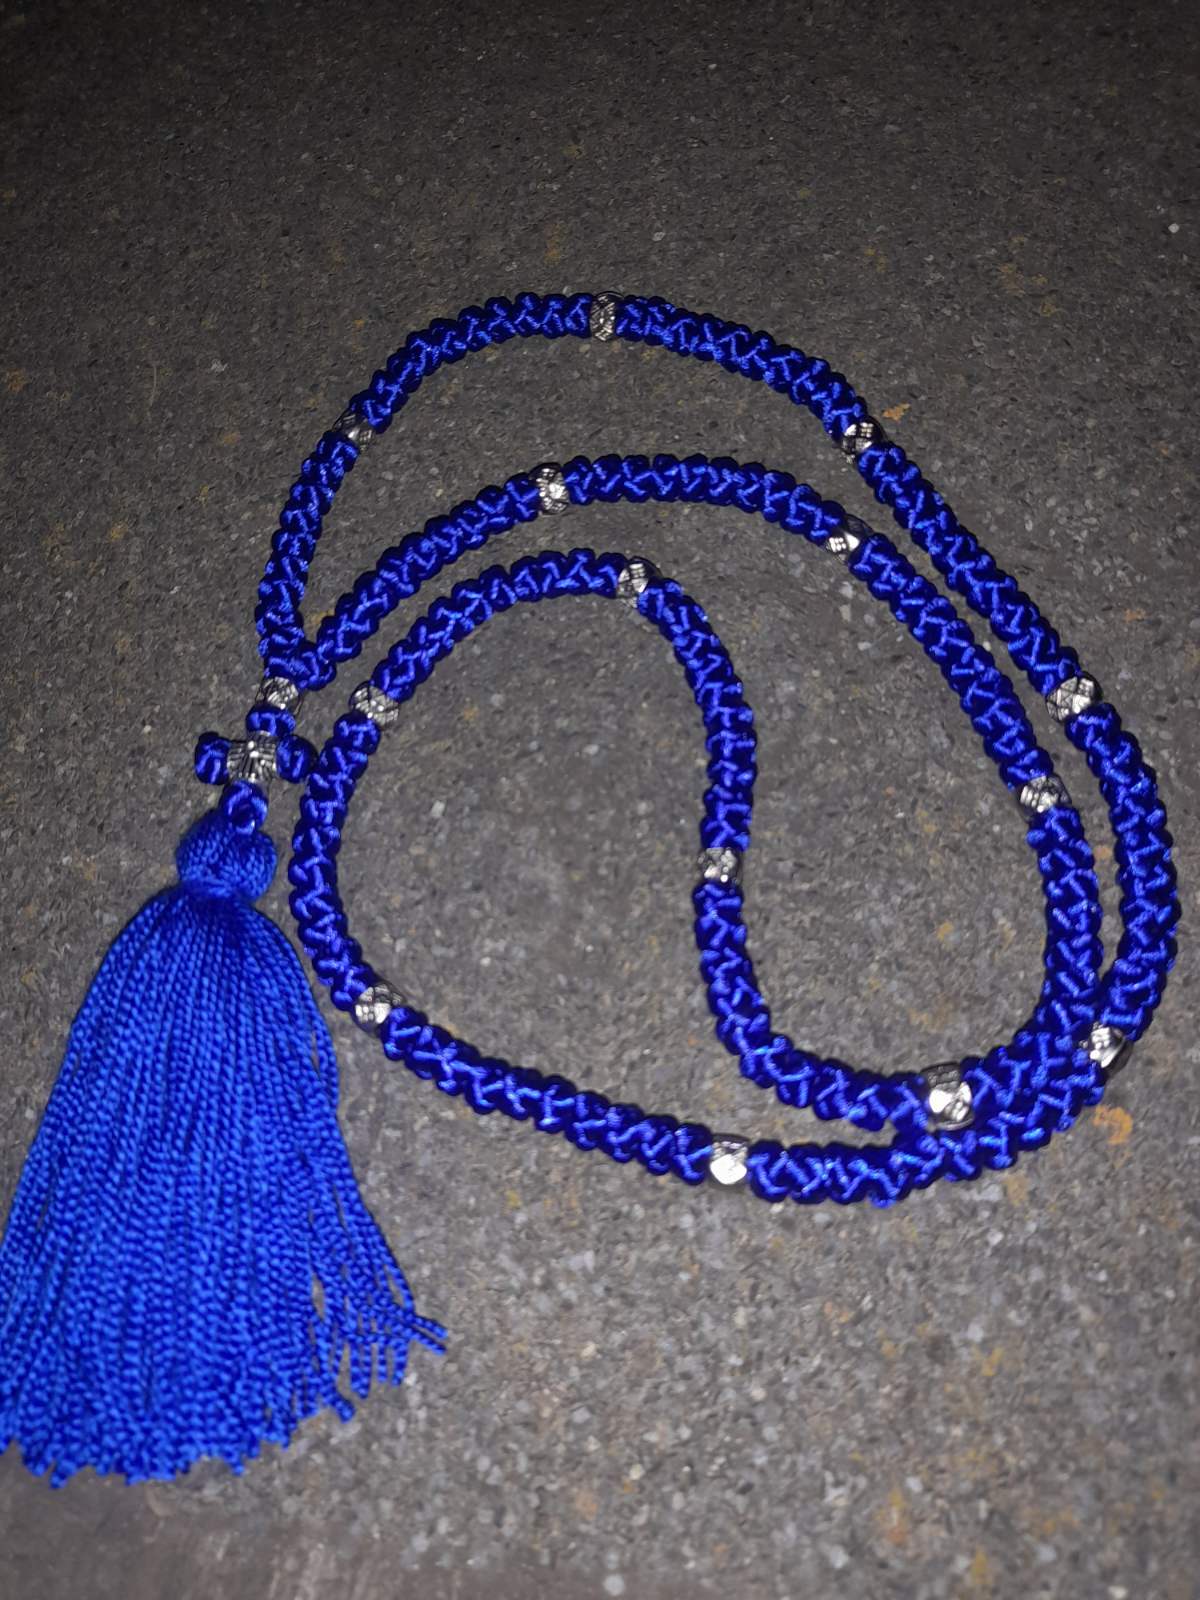 Prayer Rope, 100 knots with cross and blue beads